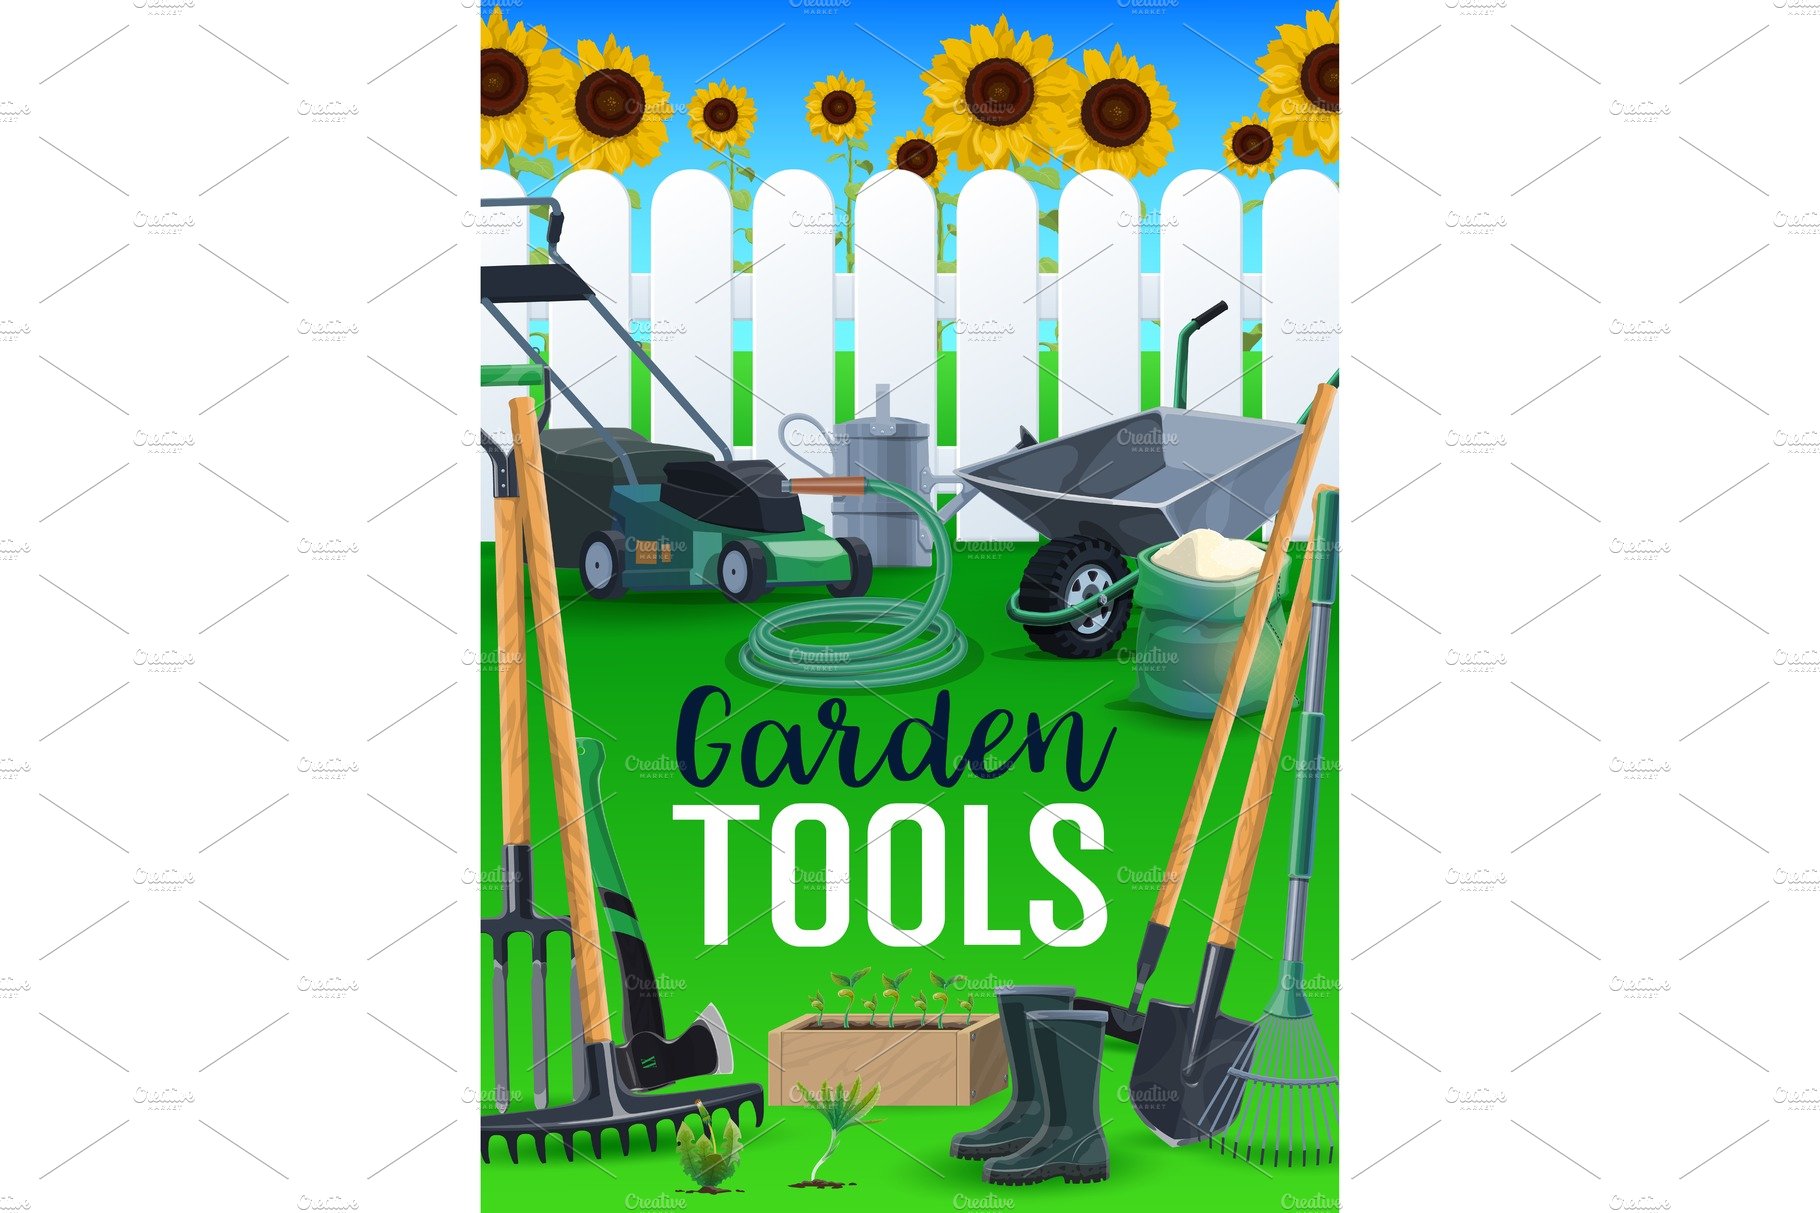 Agriculture farming tools cover image.